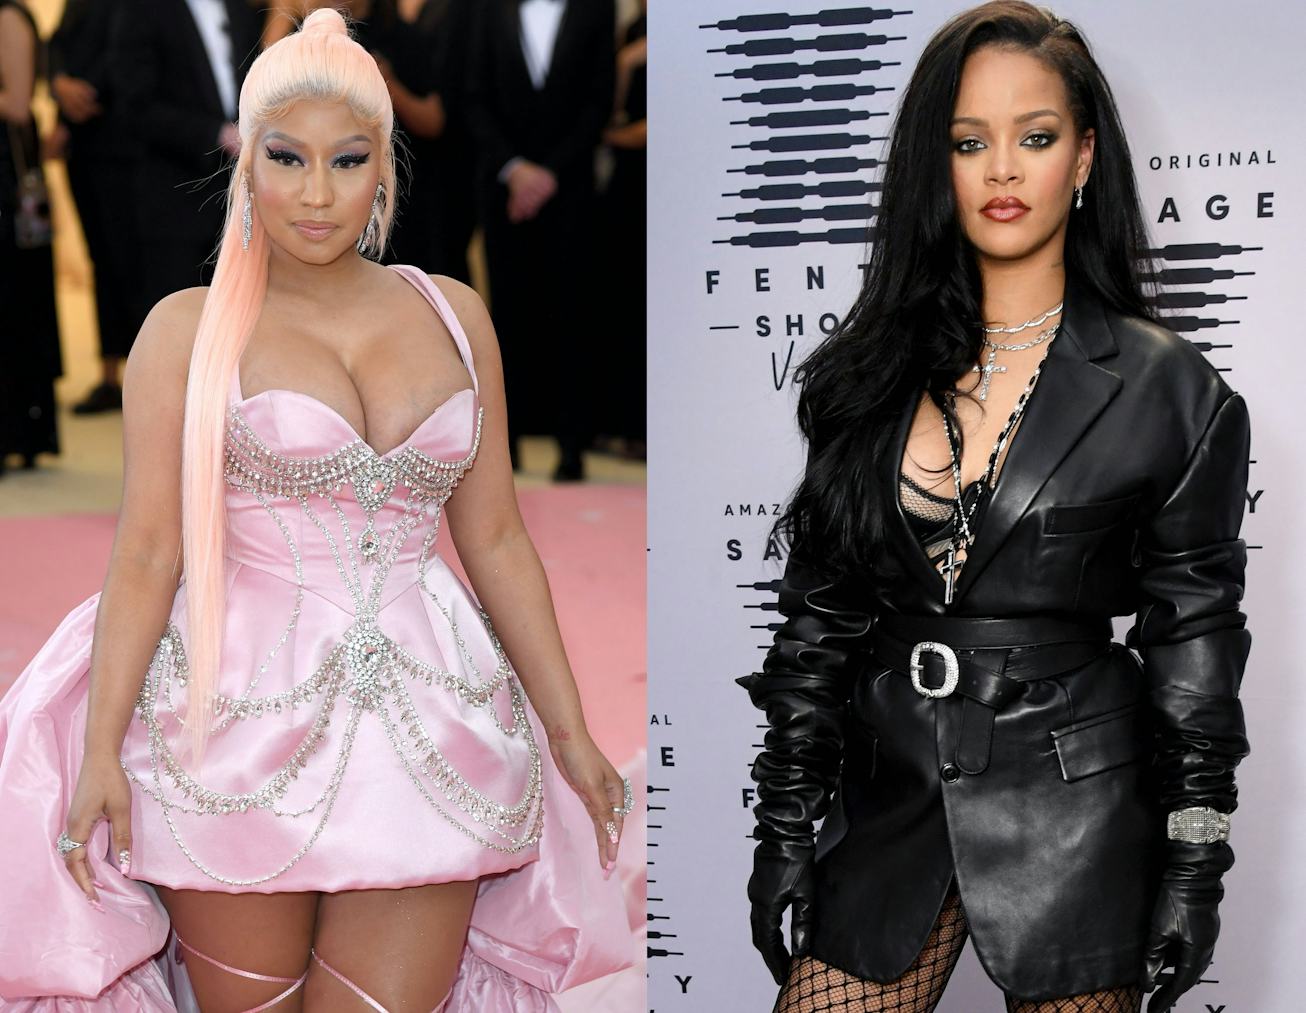 Some fans think Nicki Minaj and Rihanna are collaborating on a new song.